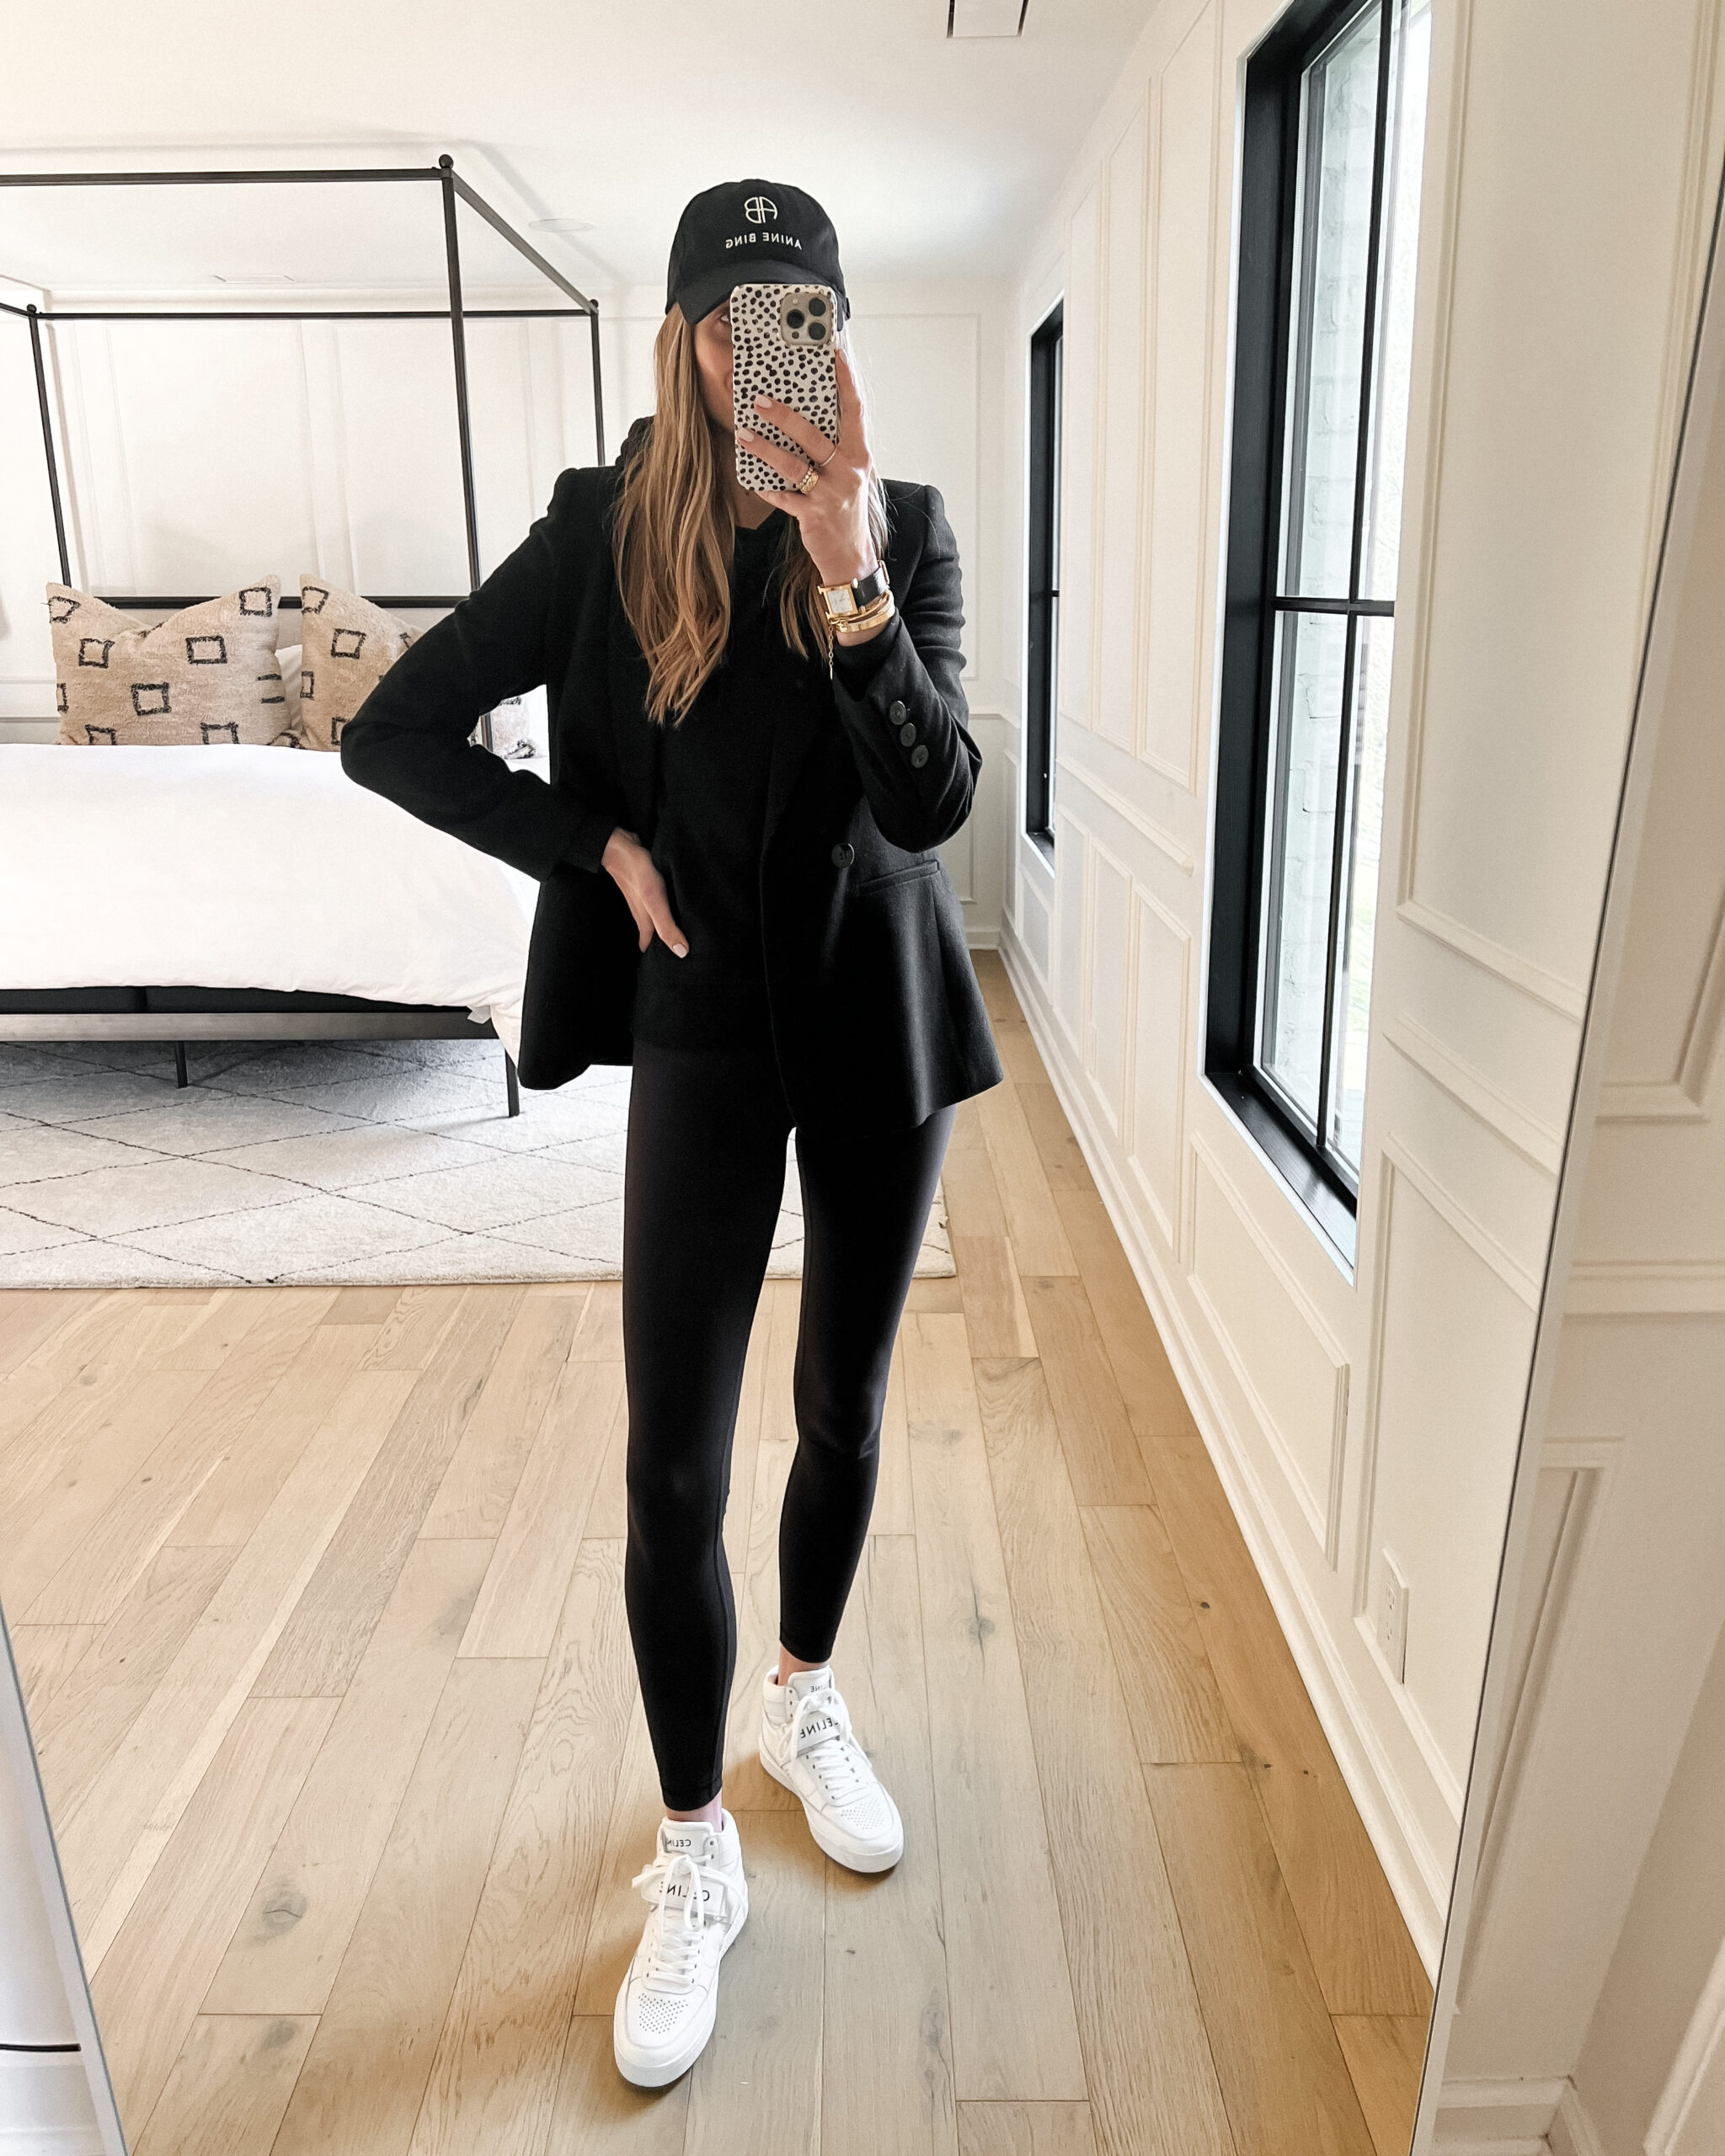 How To Wear Black Leggings With White Shoes?